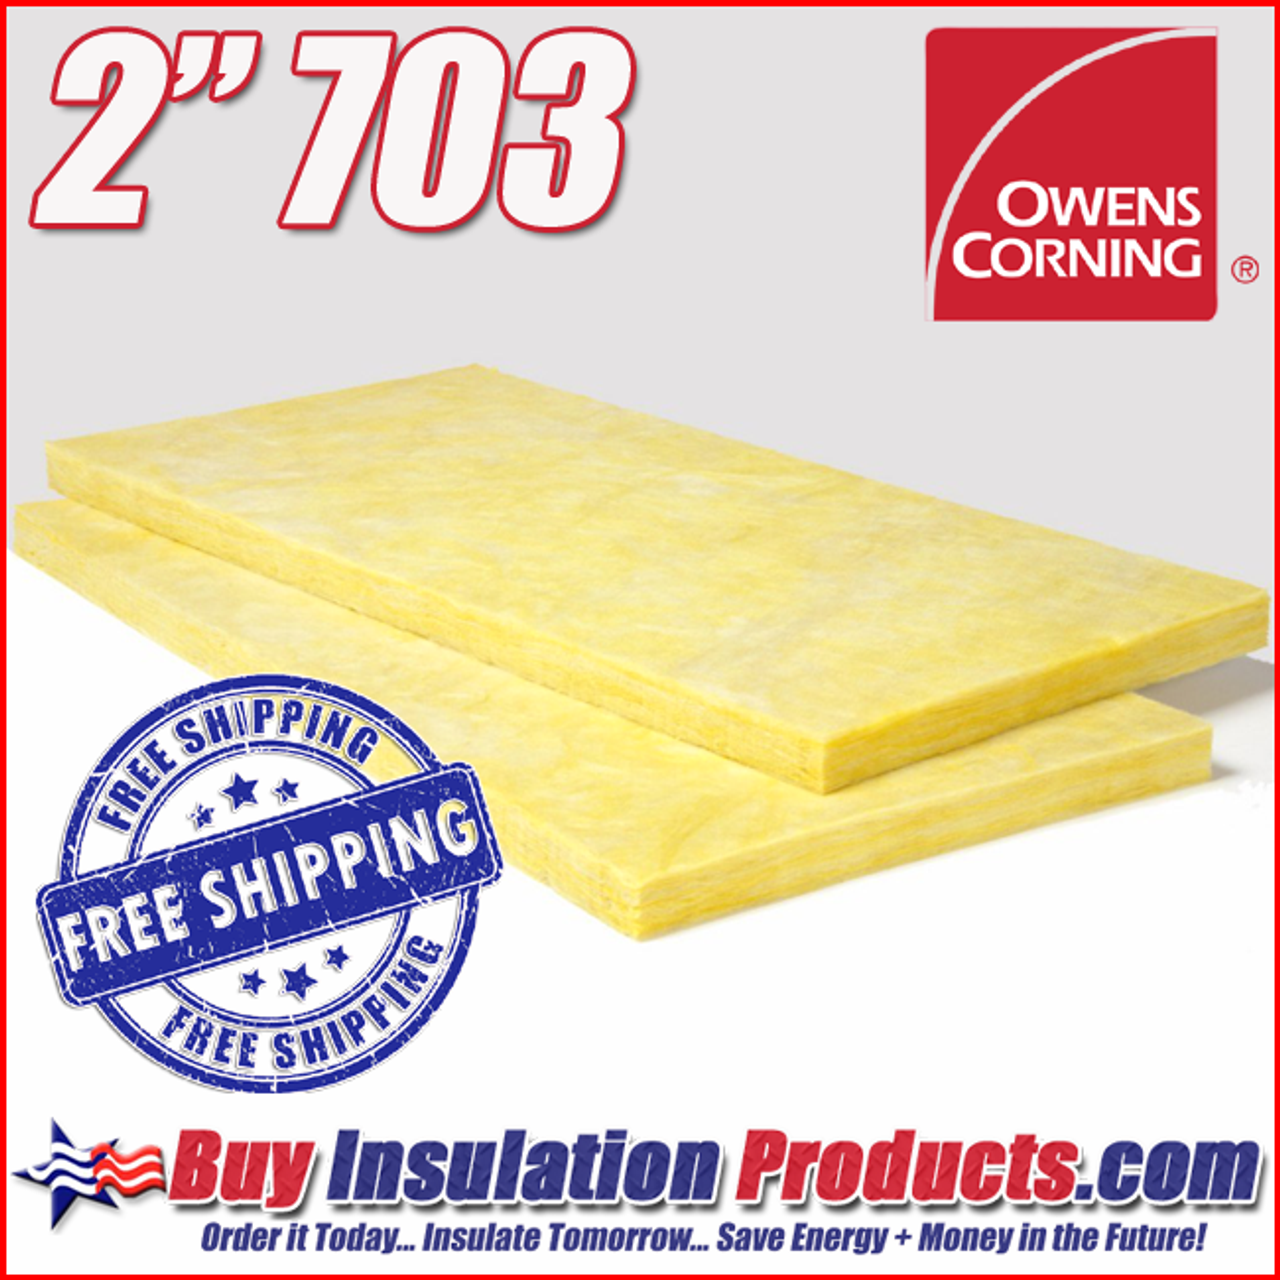 Acoustic Insulation Owens Corning 703 2 inch Pack of 6